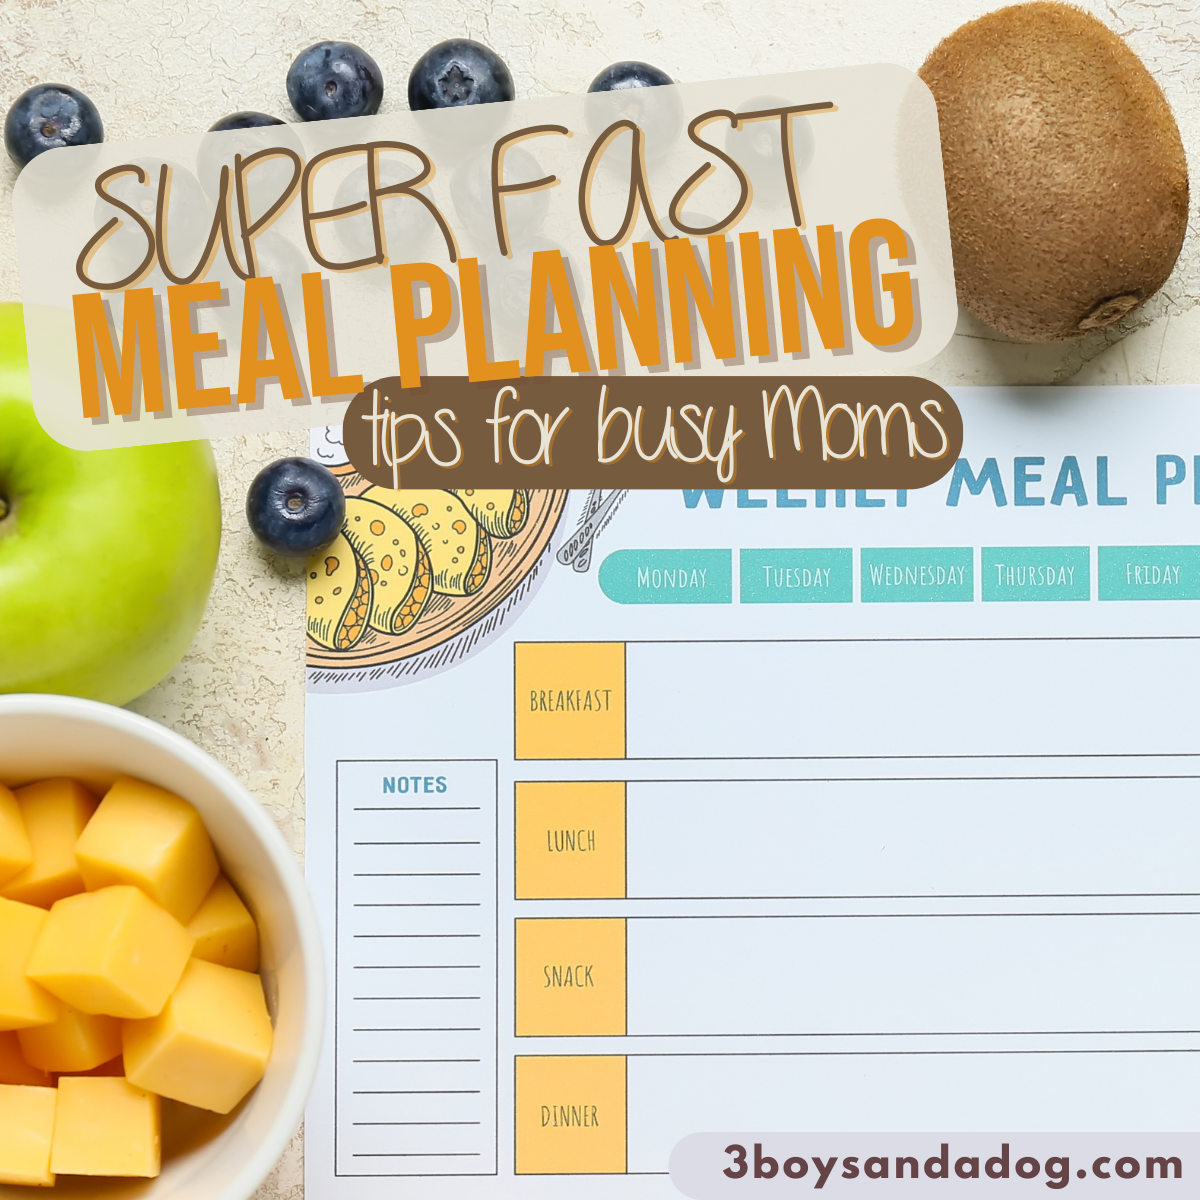 Time-Saving Meal Planning Methods for Busy Mothers